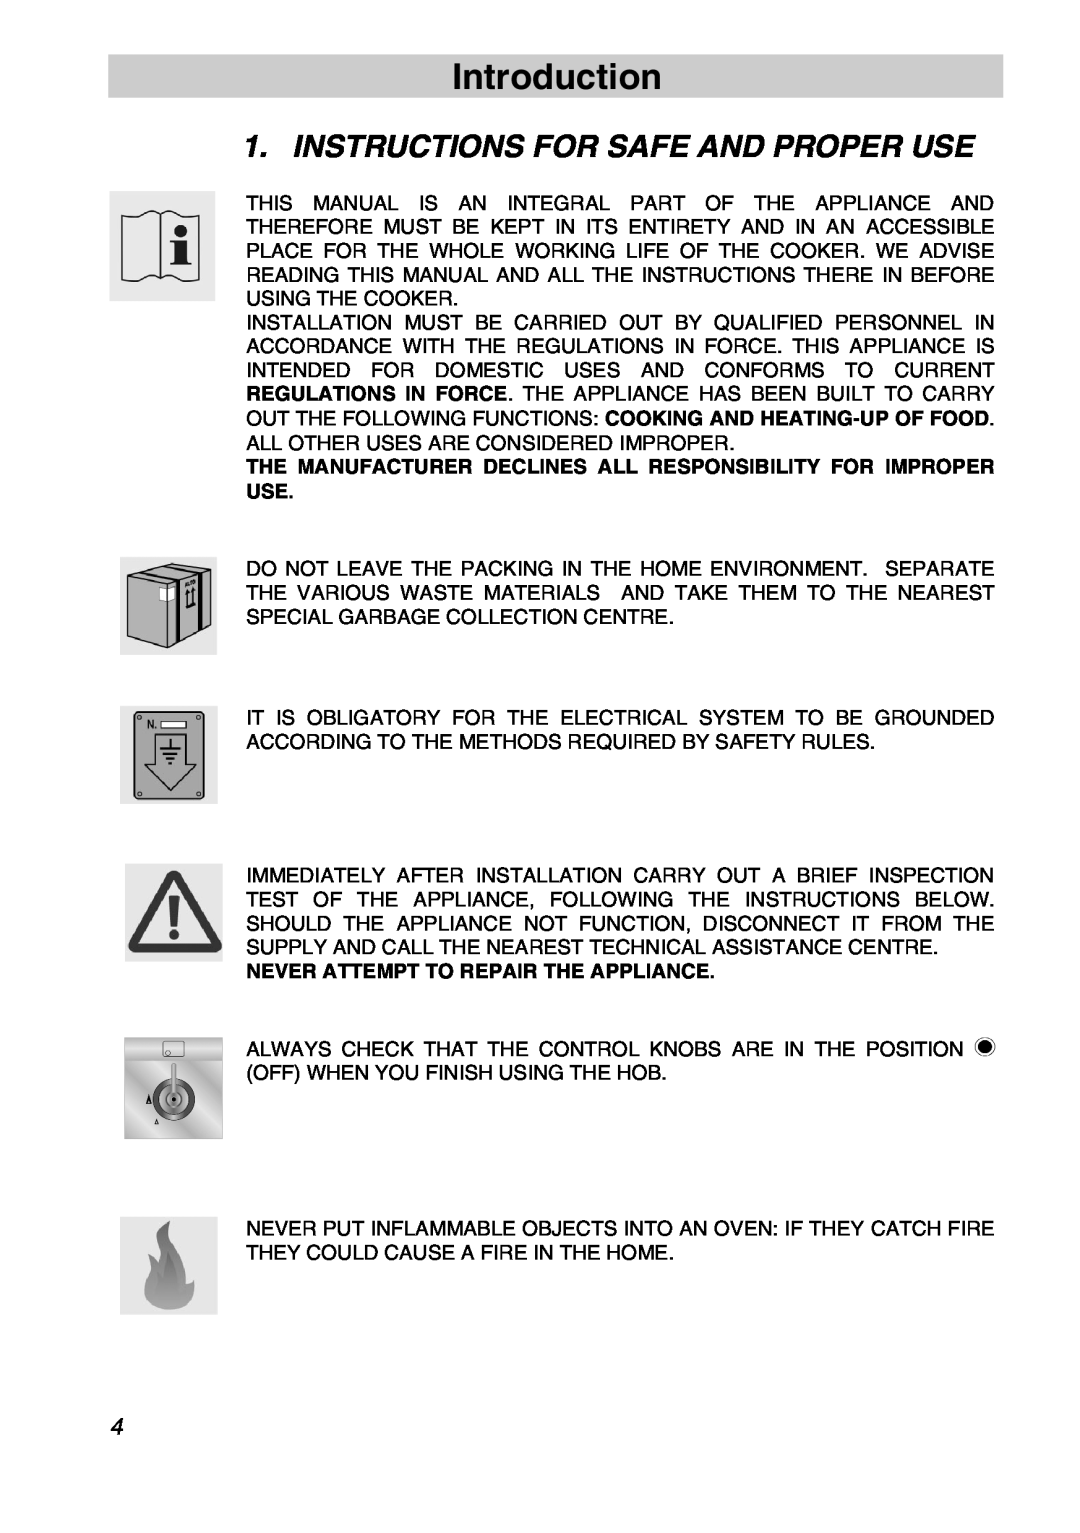 Smeg FS61XPZ5 manual Introduction, Instructions For Safe And Proper Use, Never Attempt To Repair The Appliance 